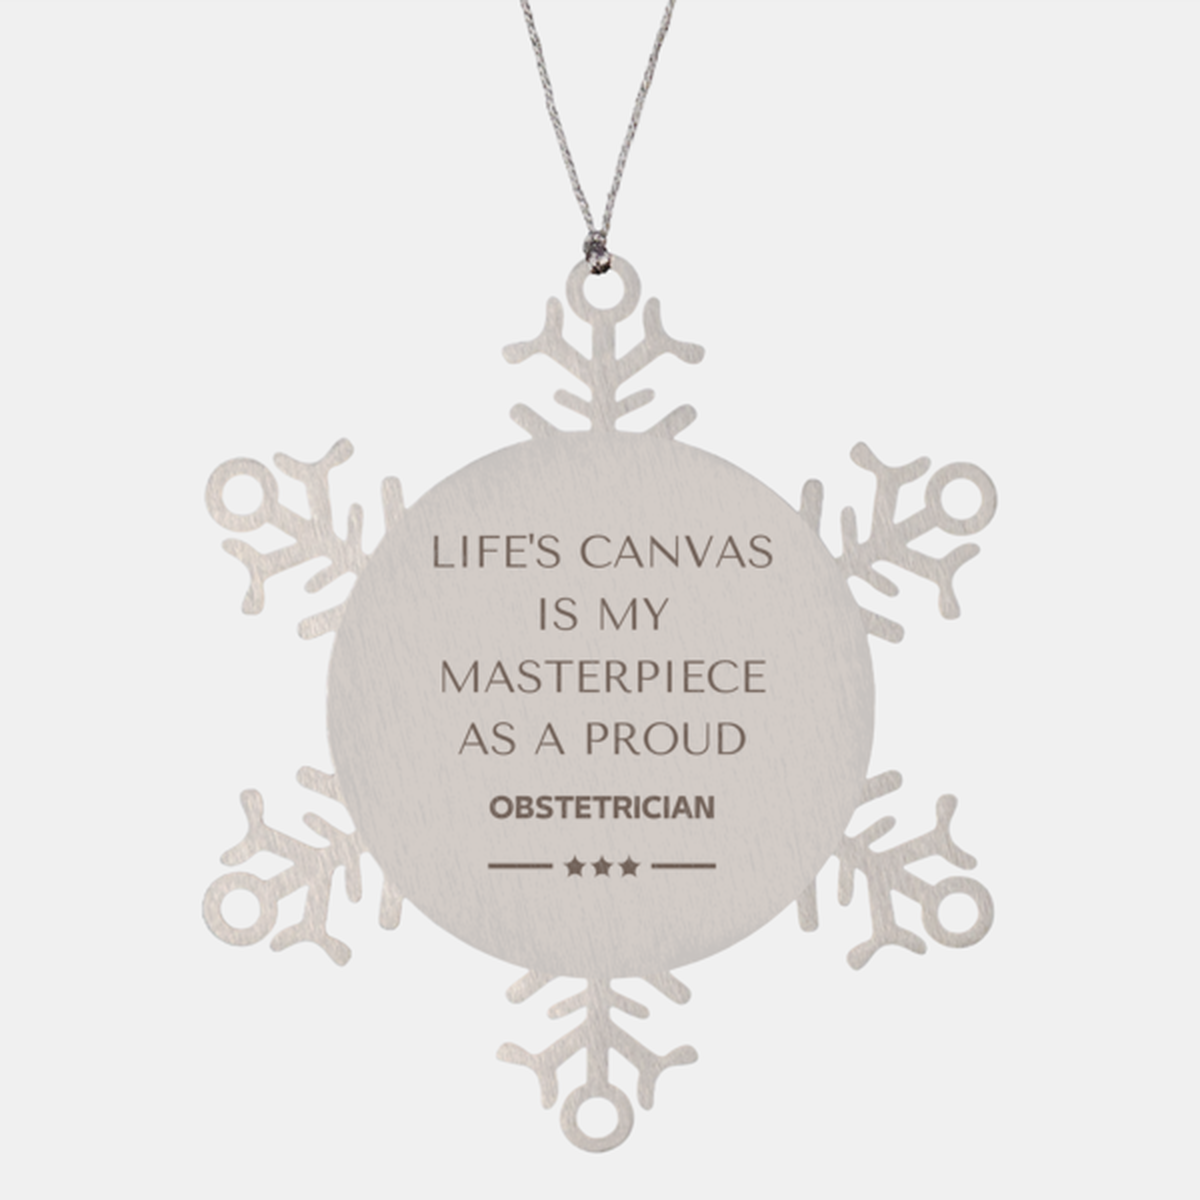 Proud Obstetrician Gifts, Life's canvas is my masterpiece, Epic Birthday Christmas Unique Snowflake Ornament For Obstetrician, Coworkers, Men, Women, Friends